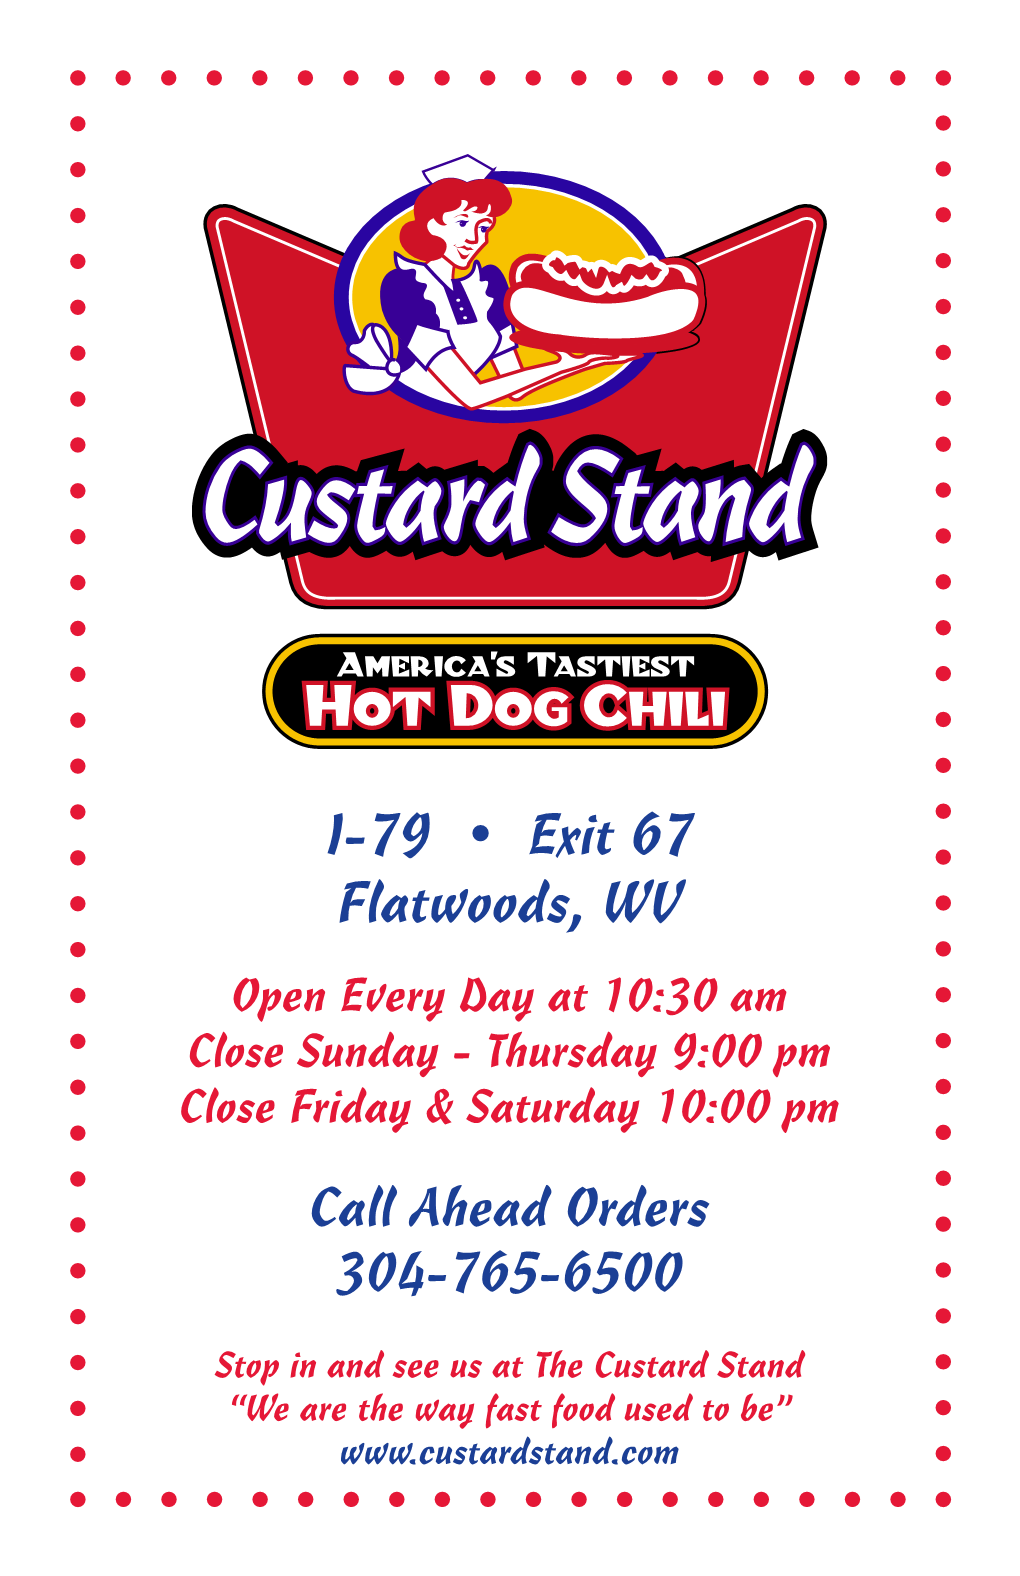 I-79 • Exit 67 Flatwoods, WV Open Every Day at 10:30 Am Close Sunday - Thursday 9:00 Pm Close Friday & Saturday 10:00 Pm Call Ahead Orders 304-765-6500